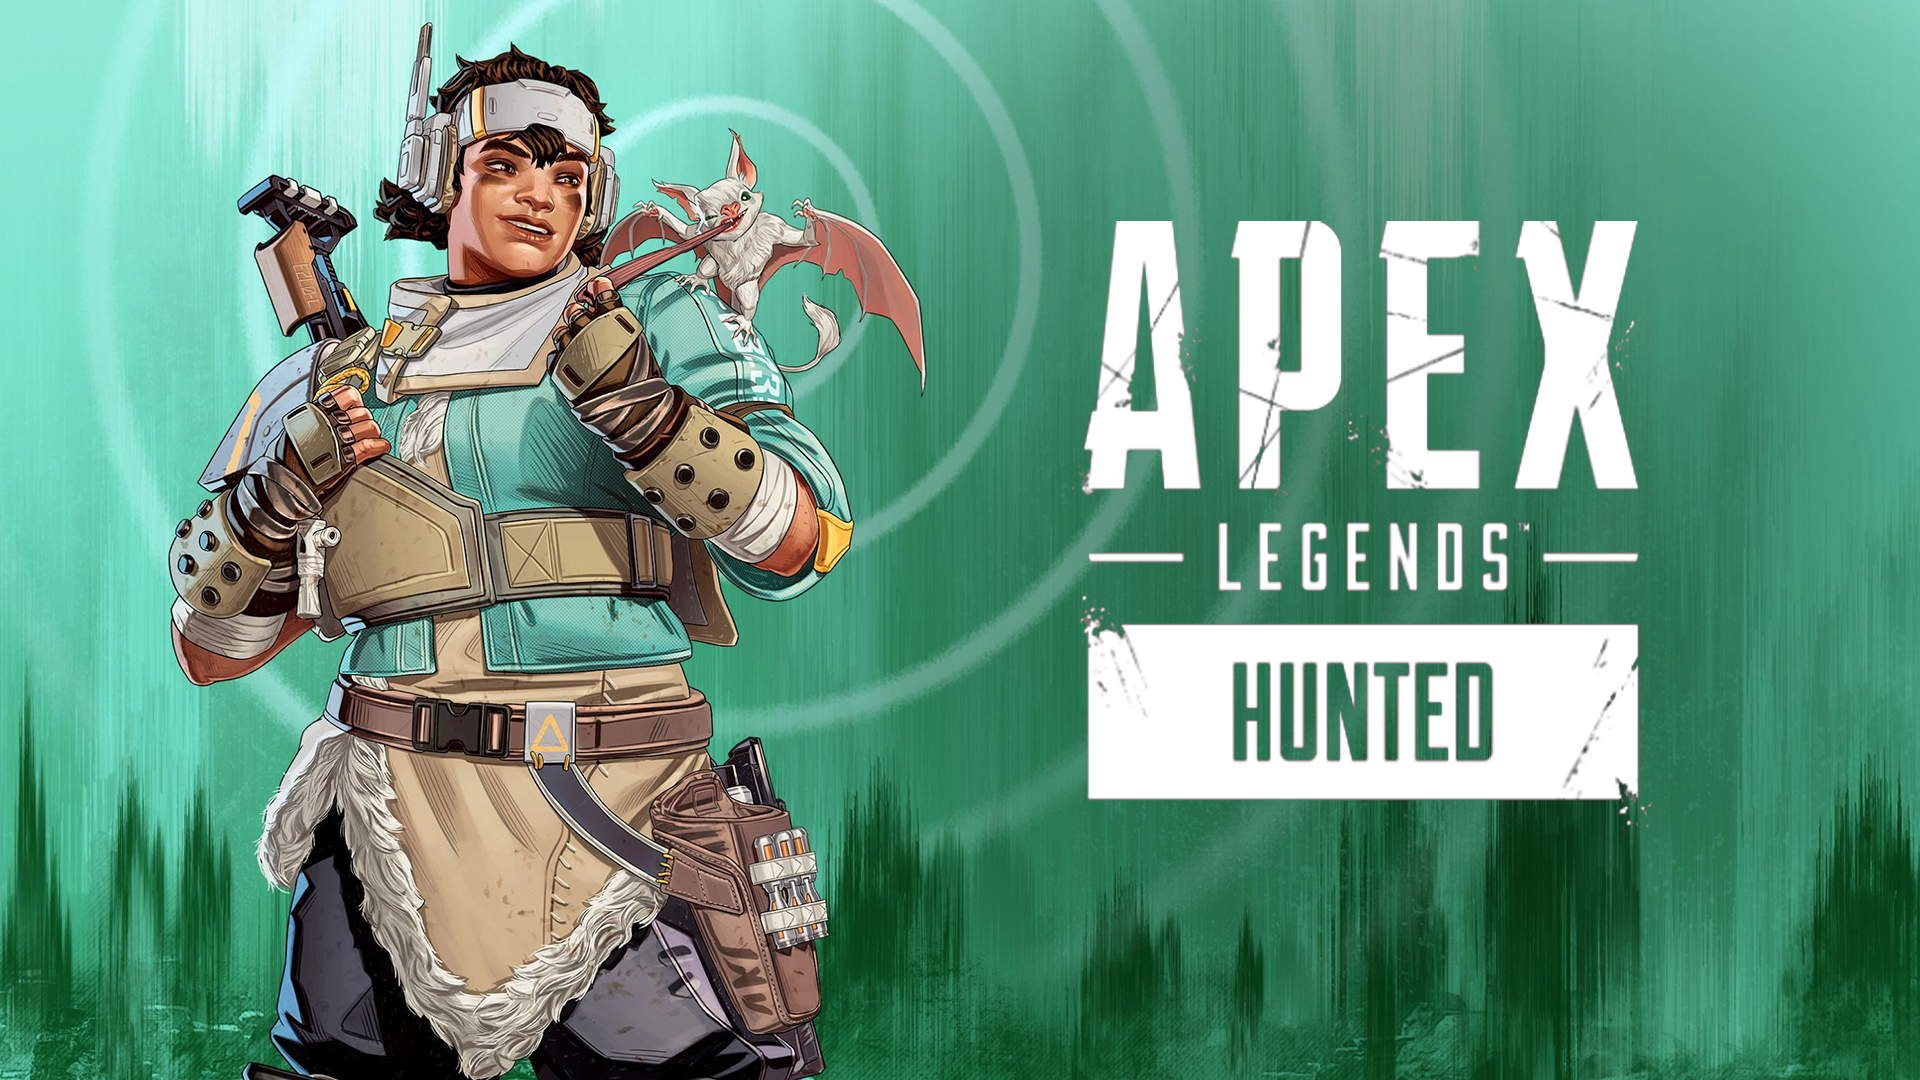 Apex Legends: Hunted Will Introduce A New Legend